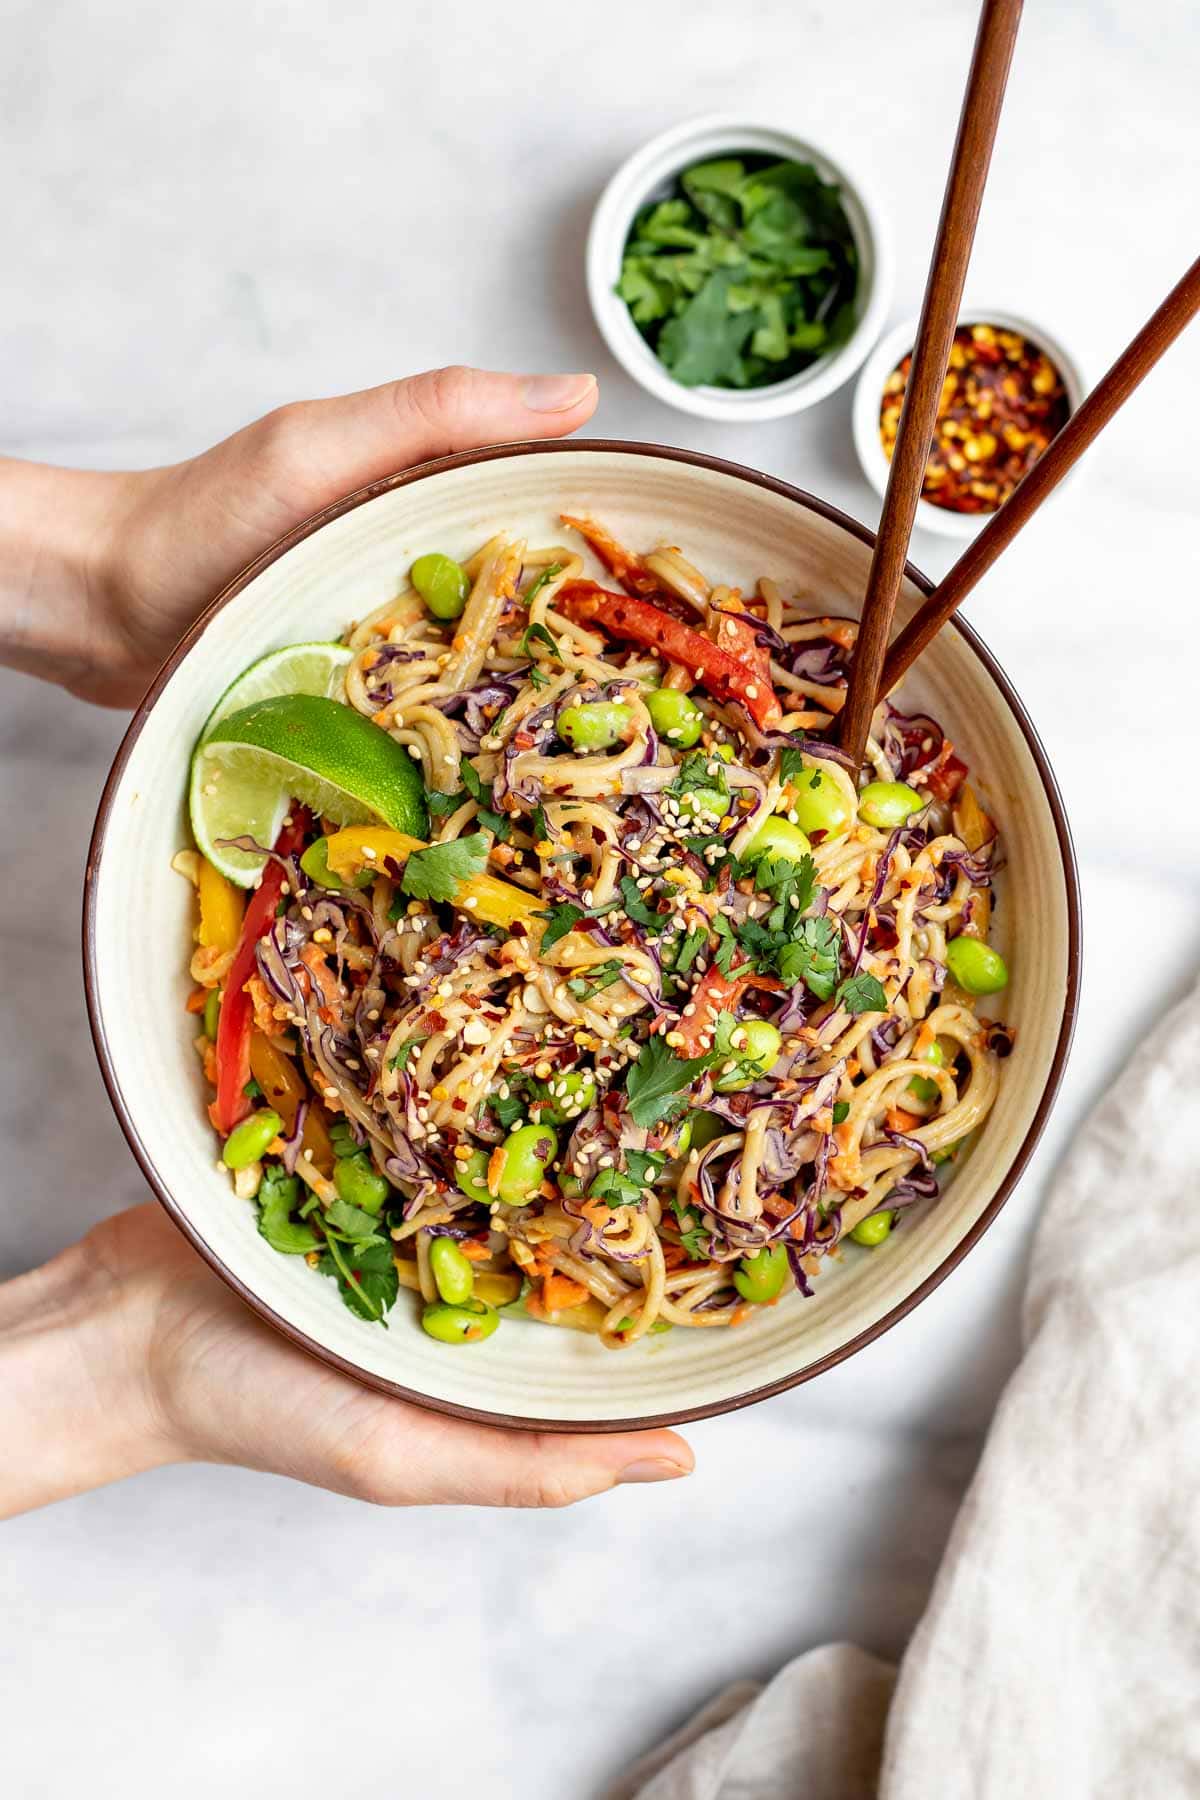 Two hands holding the thai noodle salad with chopsticks on the side.